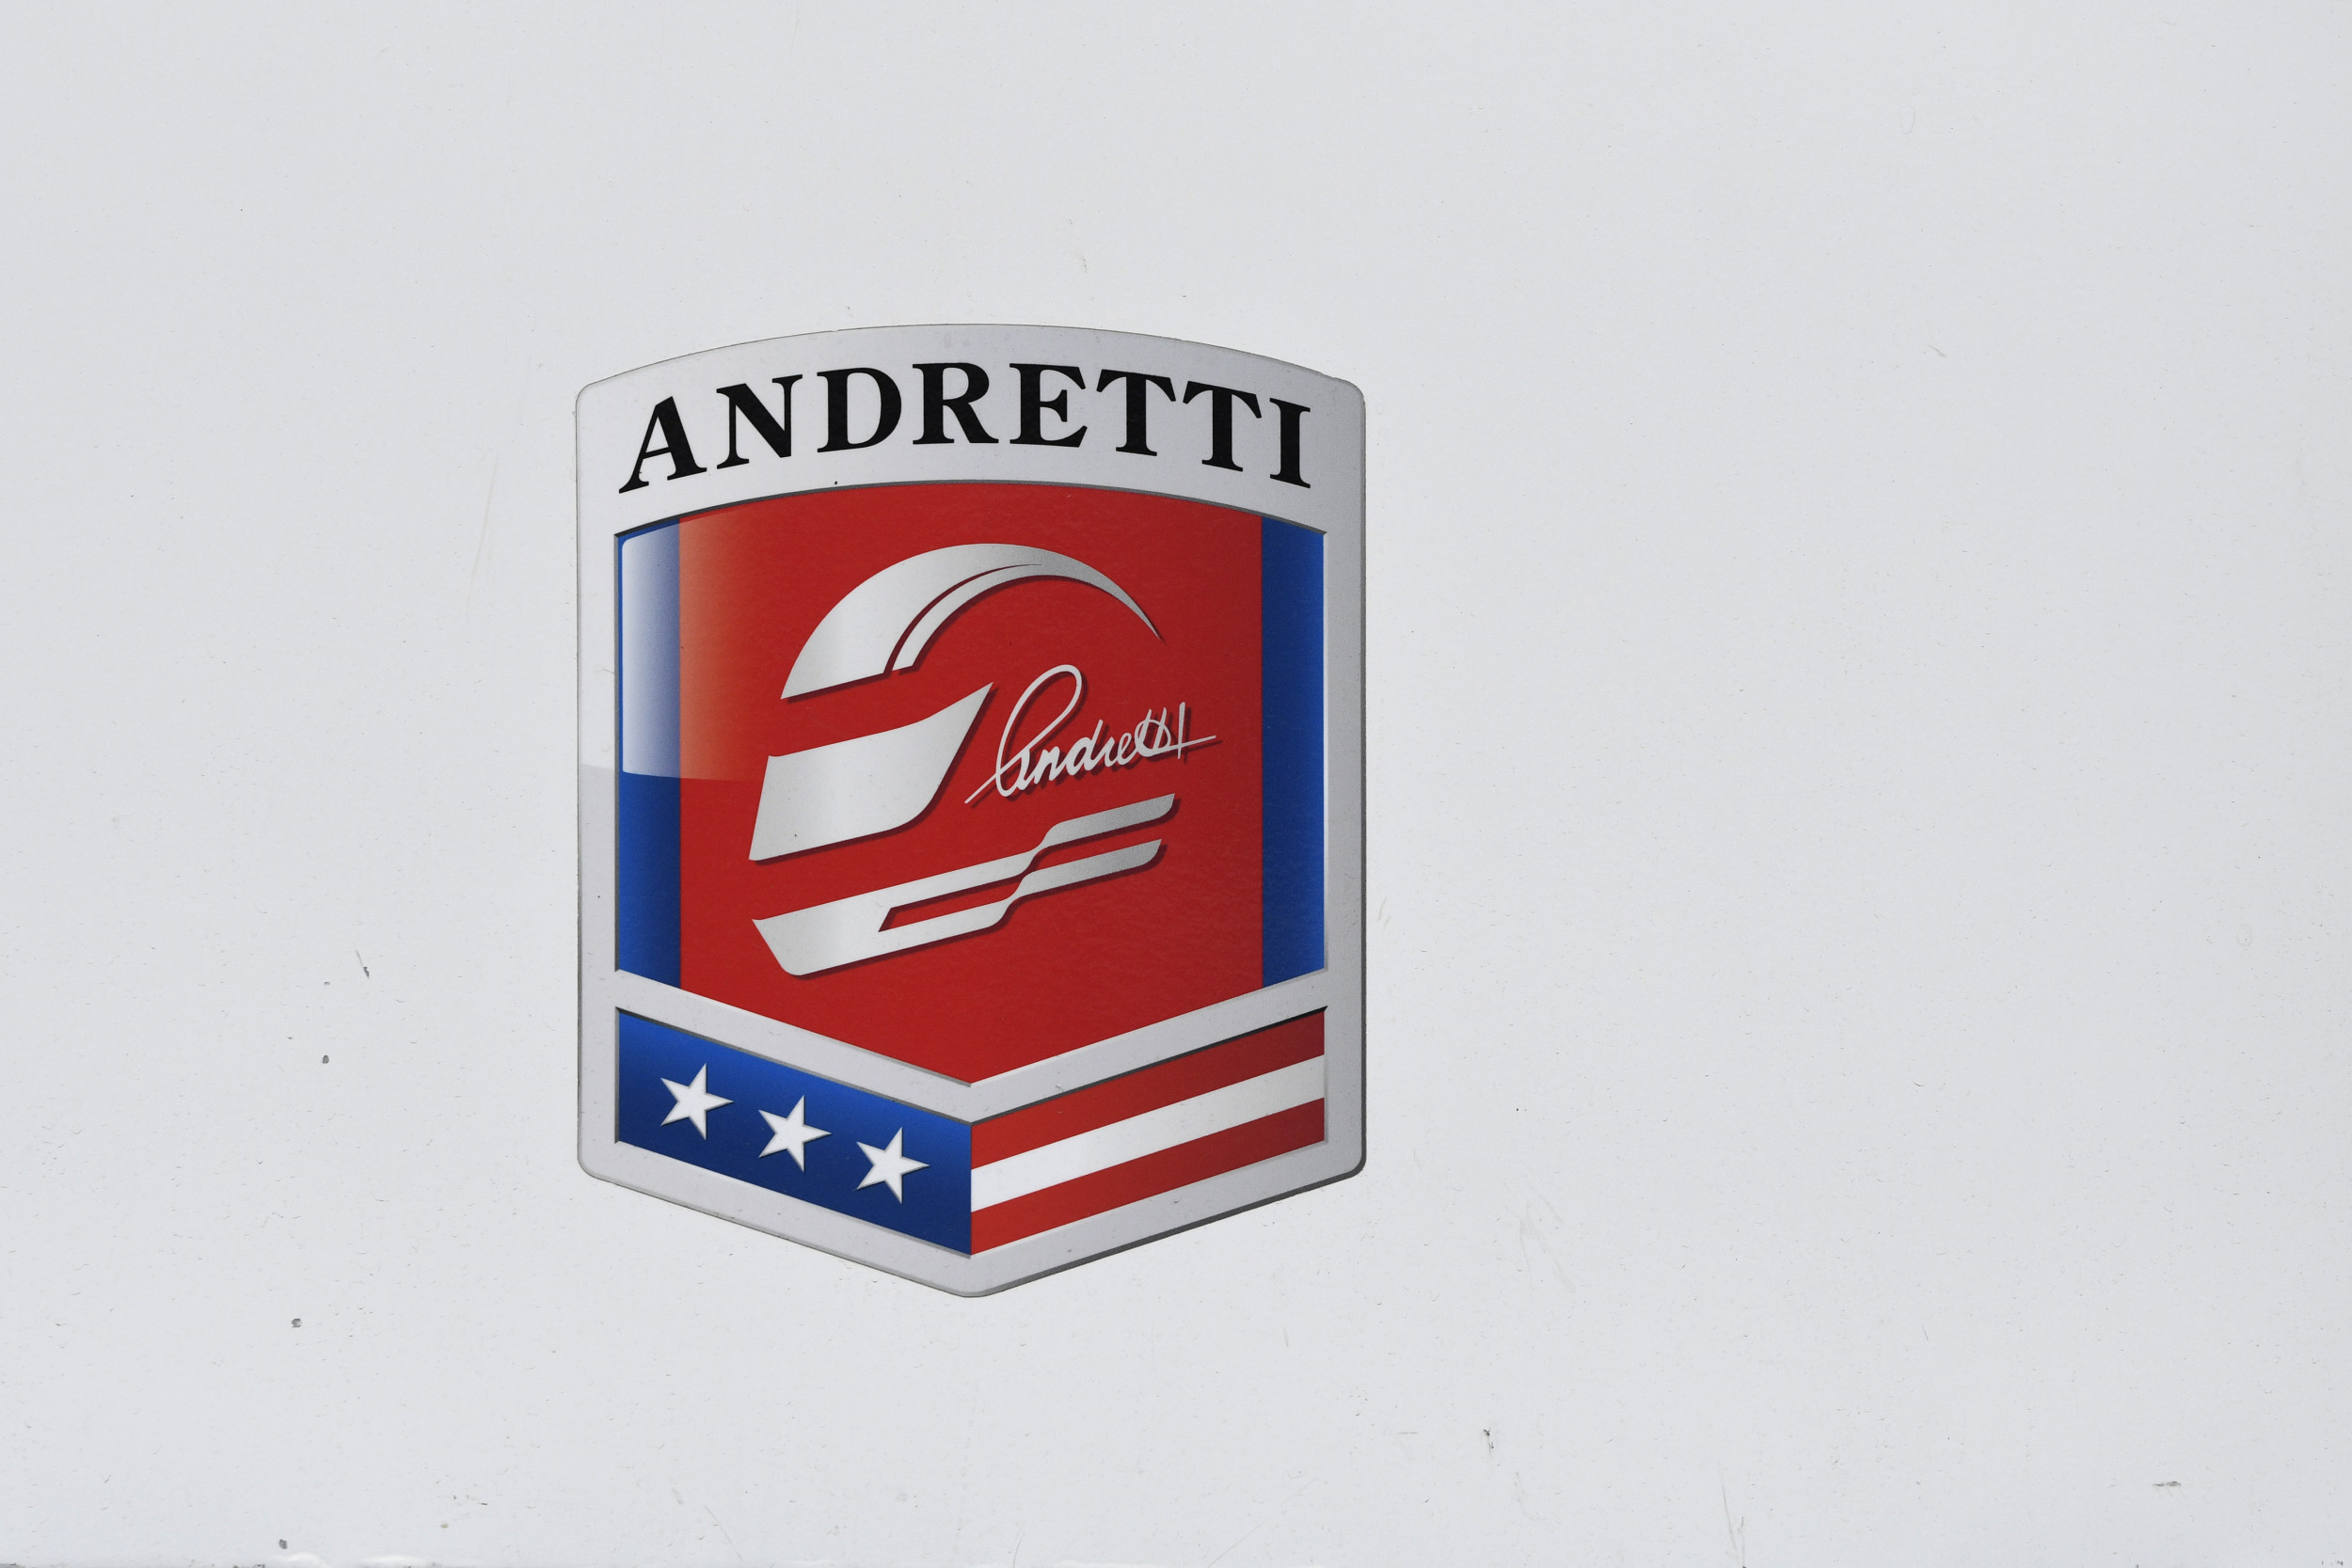 Andretti Building F1 Team From Scratch In Bid To Join 2026 Grid